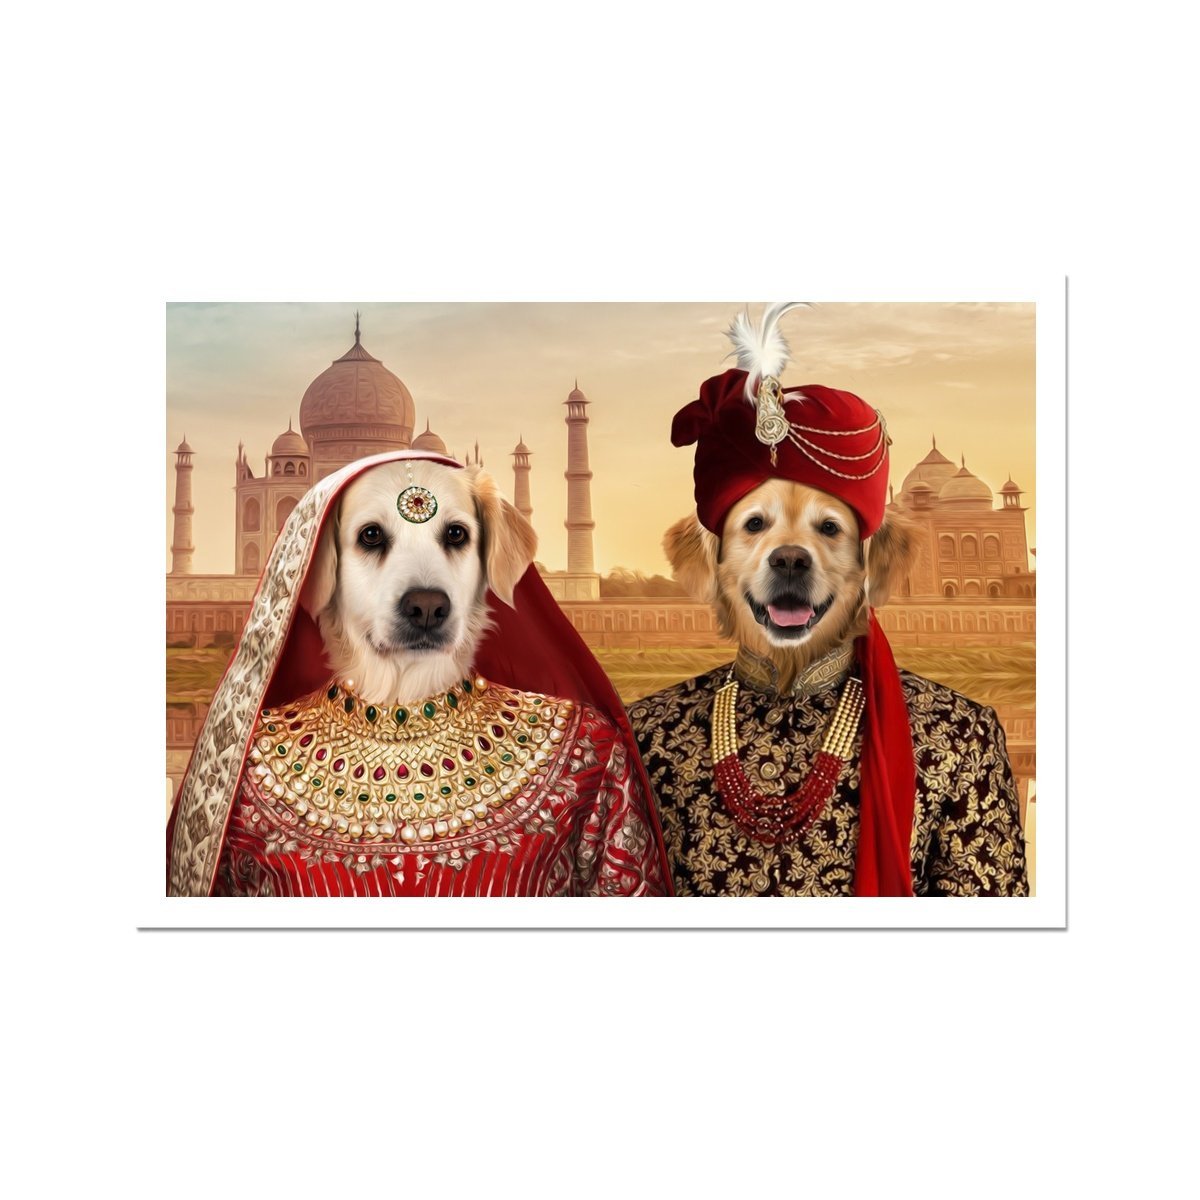 The Indian Royals: Custom Pet Poster - Paw & Glory - #pet portraits# - #dog portraits# - #pet portraits uk#Paw & Glory, paw and glory, personalized pet canvas art dog portraits canvas fun pet portraits, pet photos personalised dog print, dog victorian portrait pet portraits